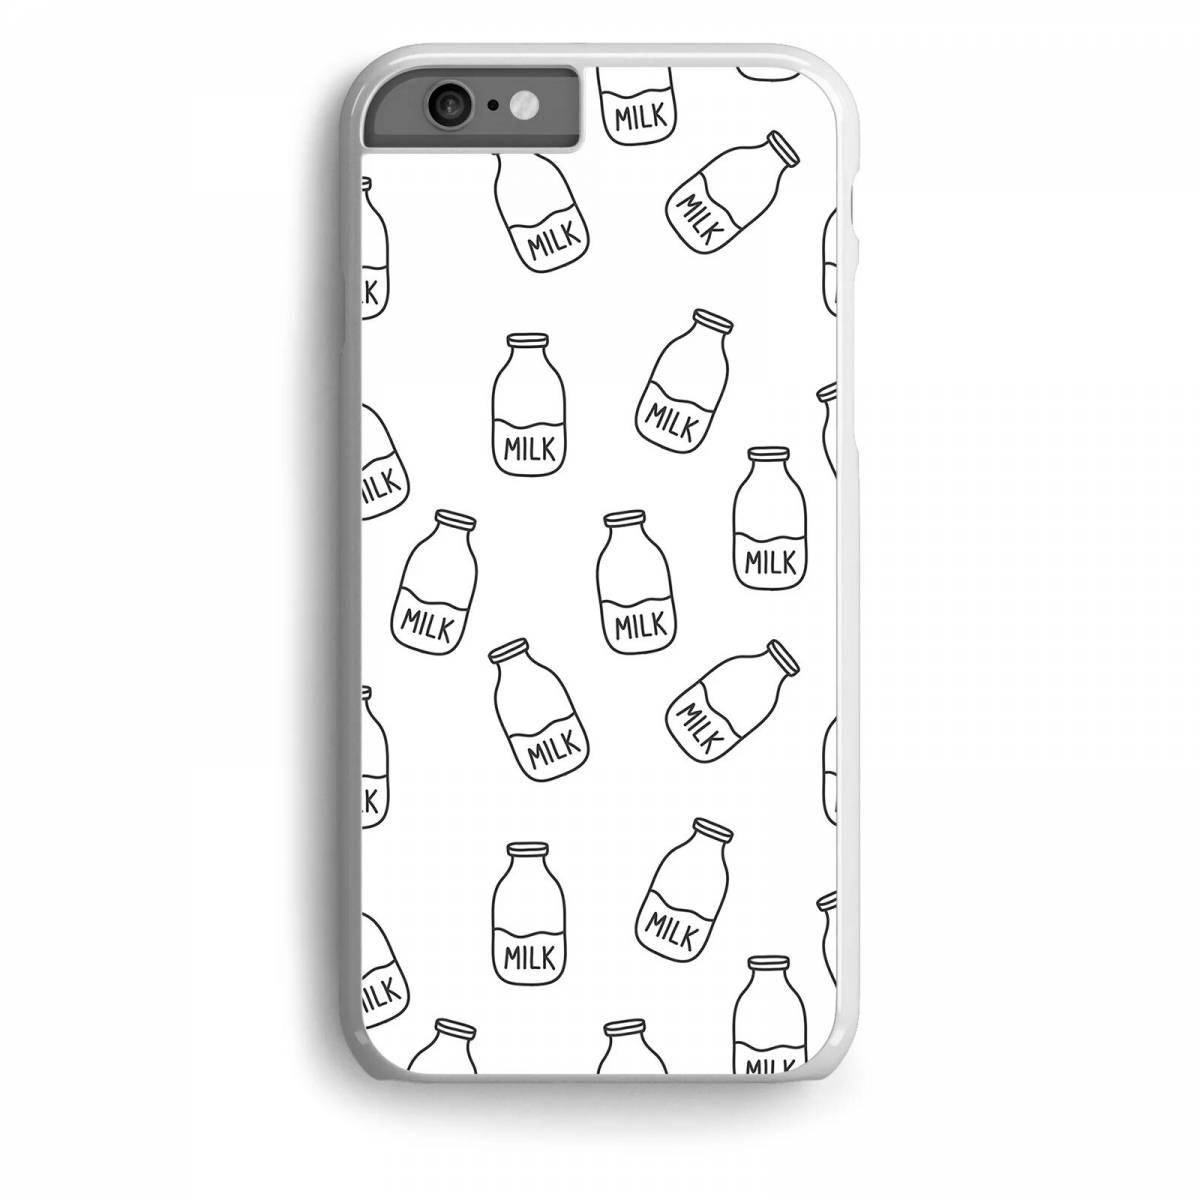 Creative iphone case coloring page